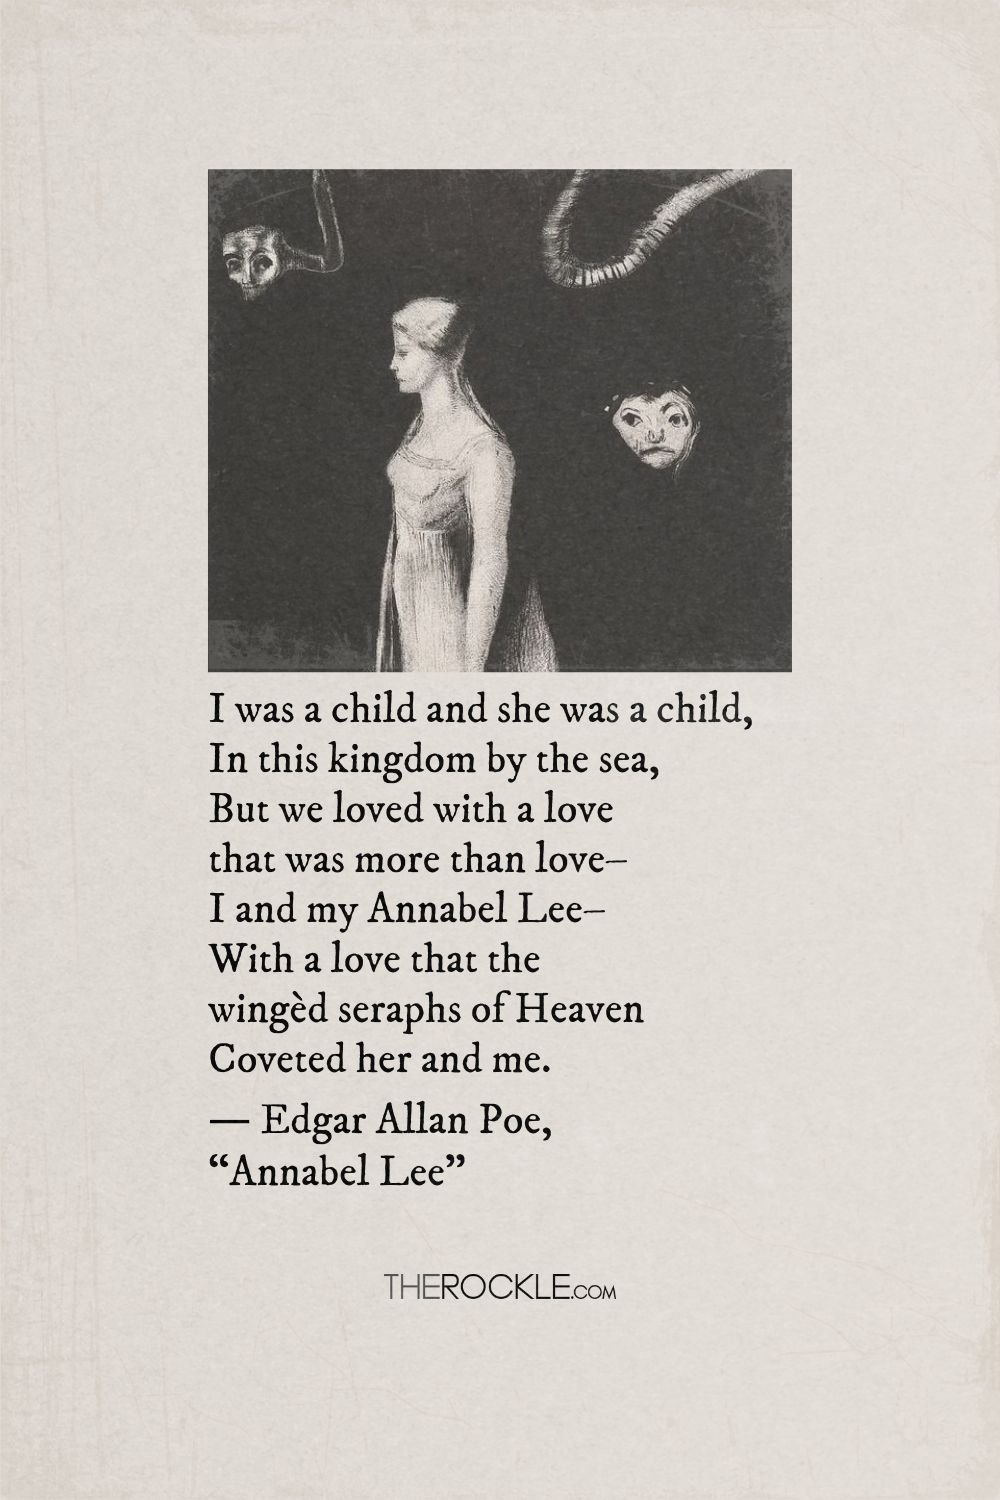 Poe's quote from the poem Annabel Lee